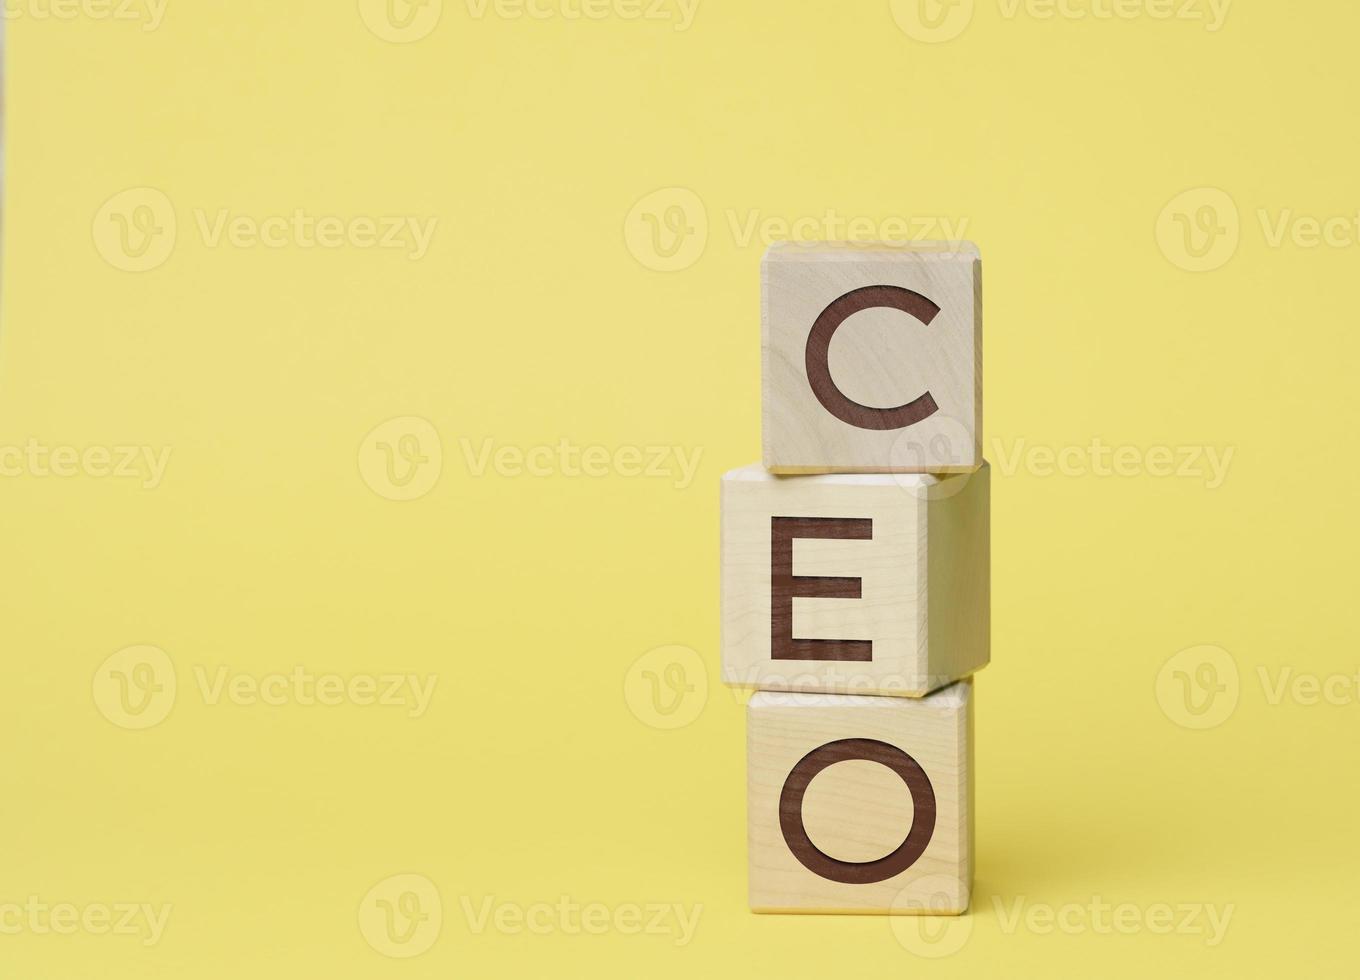 CEO inscription on wooden cubes, yellow background photo